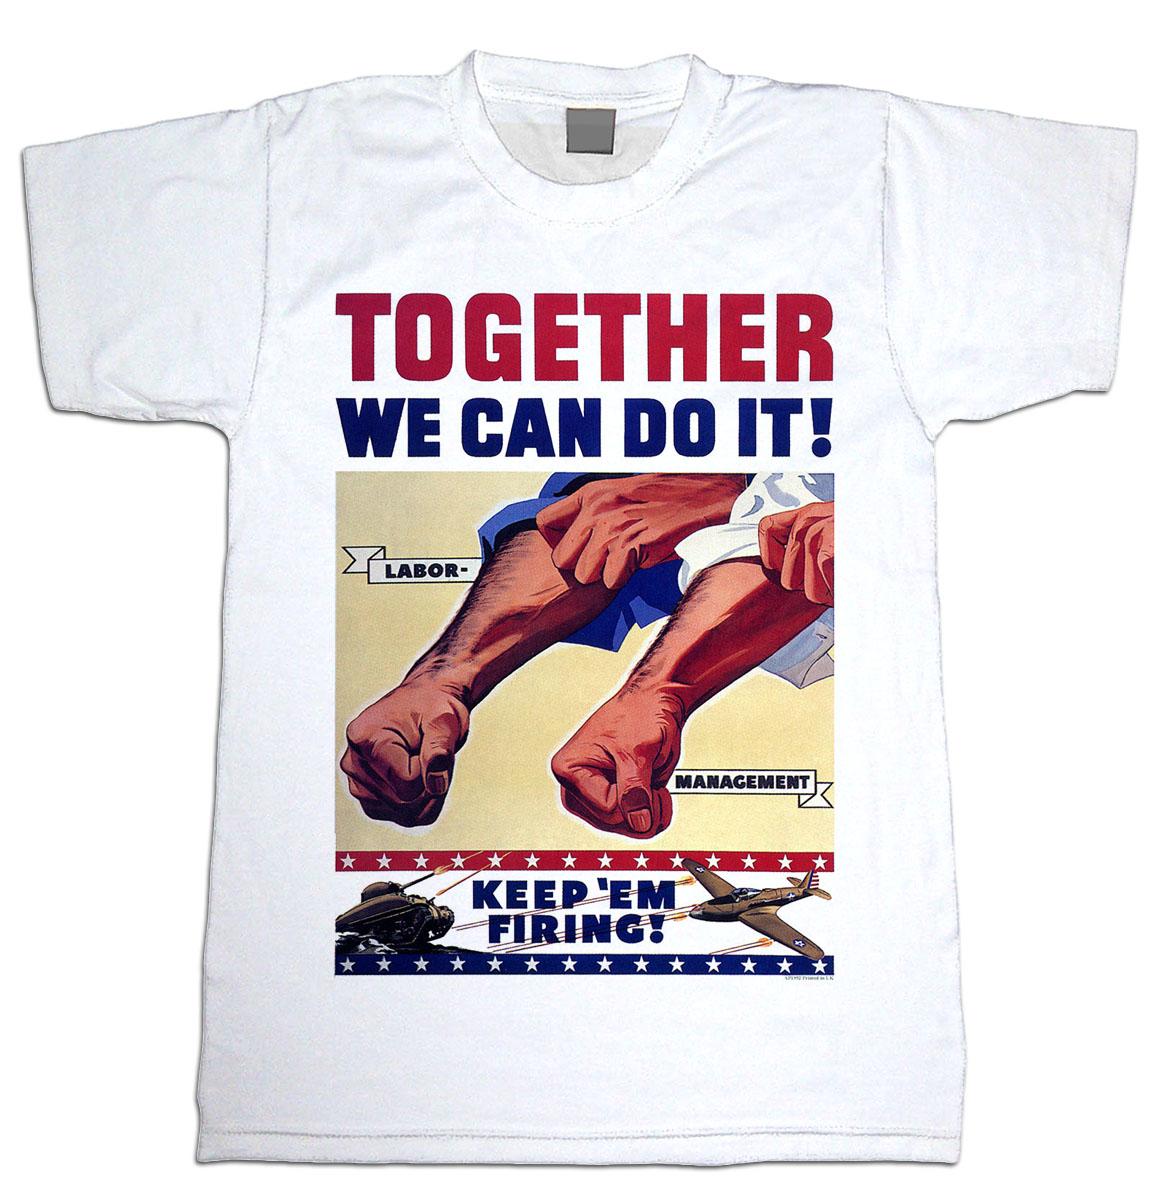 Poster Vintage We can do it